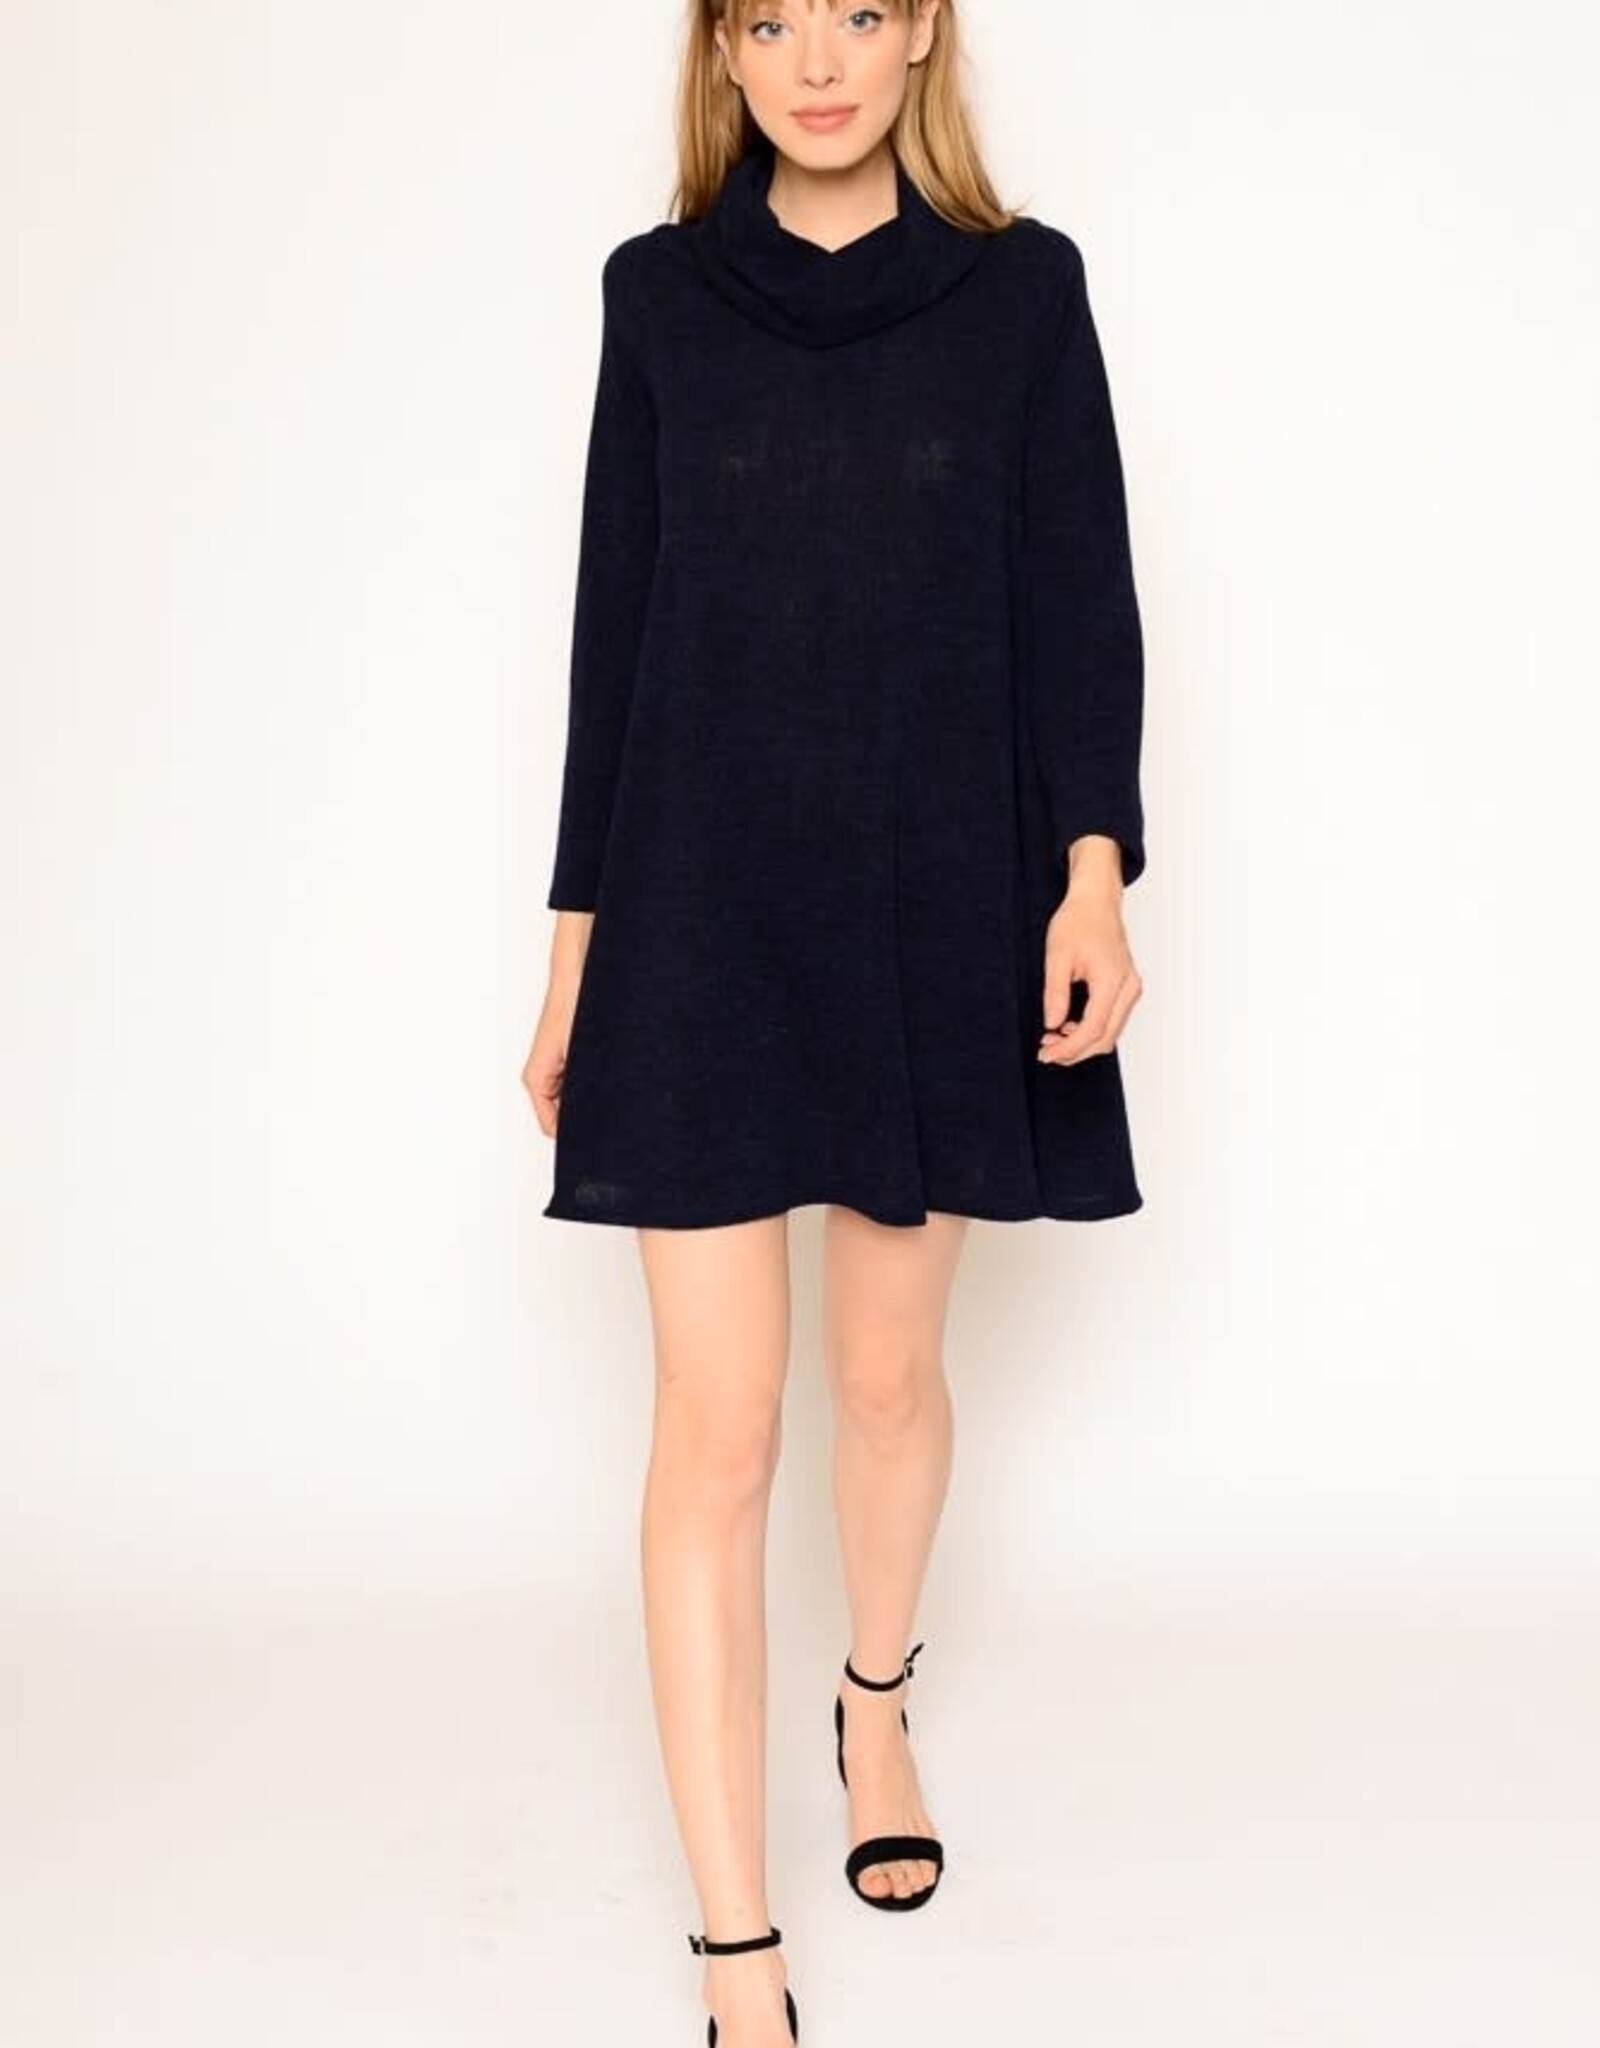 Miss Bliss Solid Knit Cowl Neck LS Dress- Navy